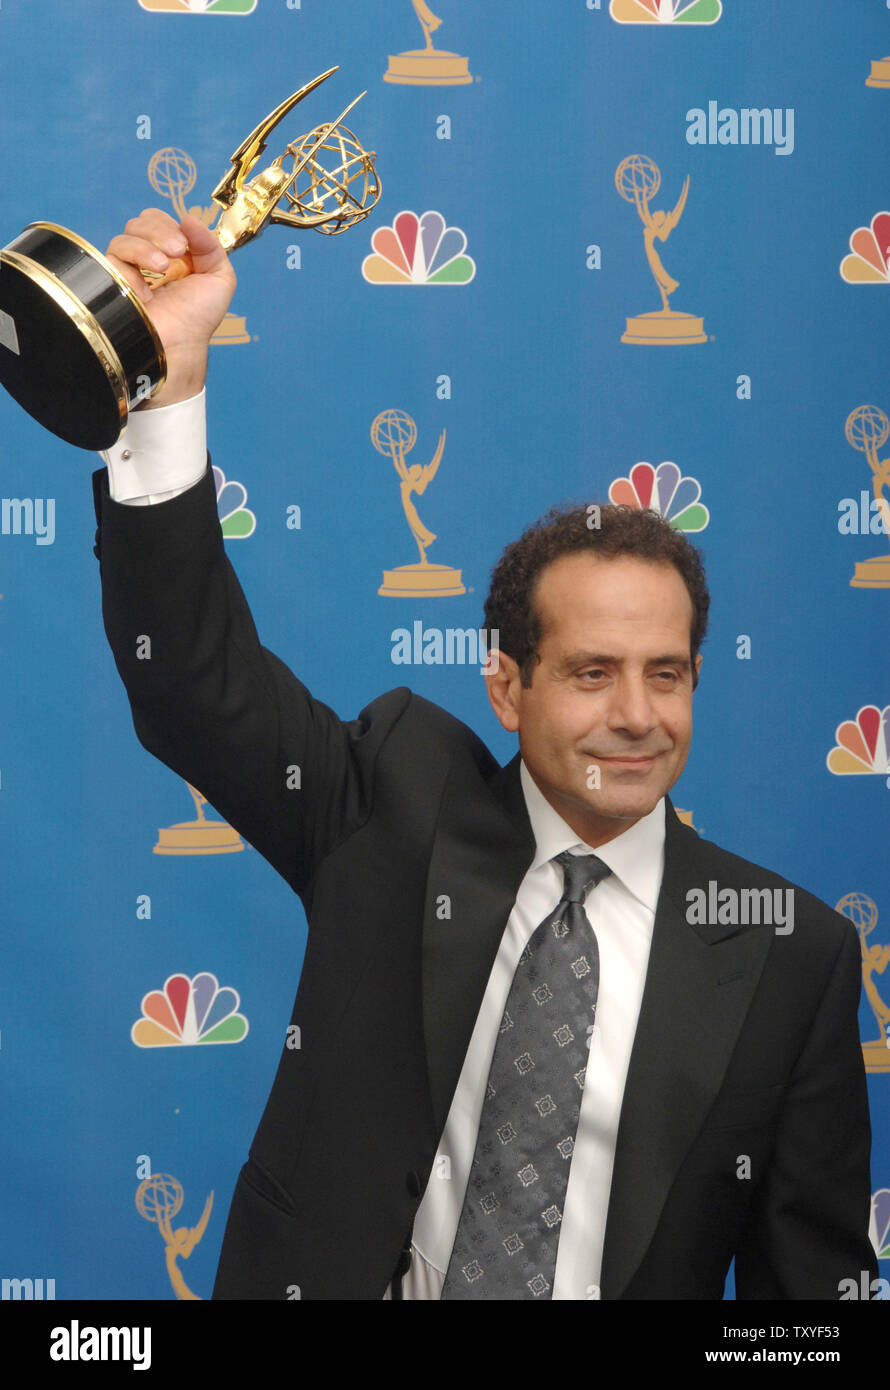 Tony Shalhoub holds his Emmy award for leading actor in a comedy series for 'Monk'  at the 58th annual Primetime Emmy awards at the Shrine Auditorium in Los Angeles, California on August 27, 2006. (UPI Photo/Jim Ruymen) Stock Photo